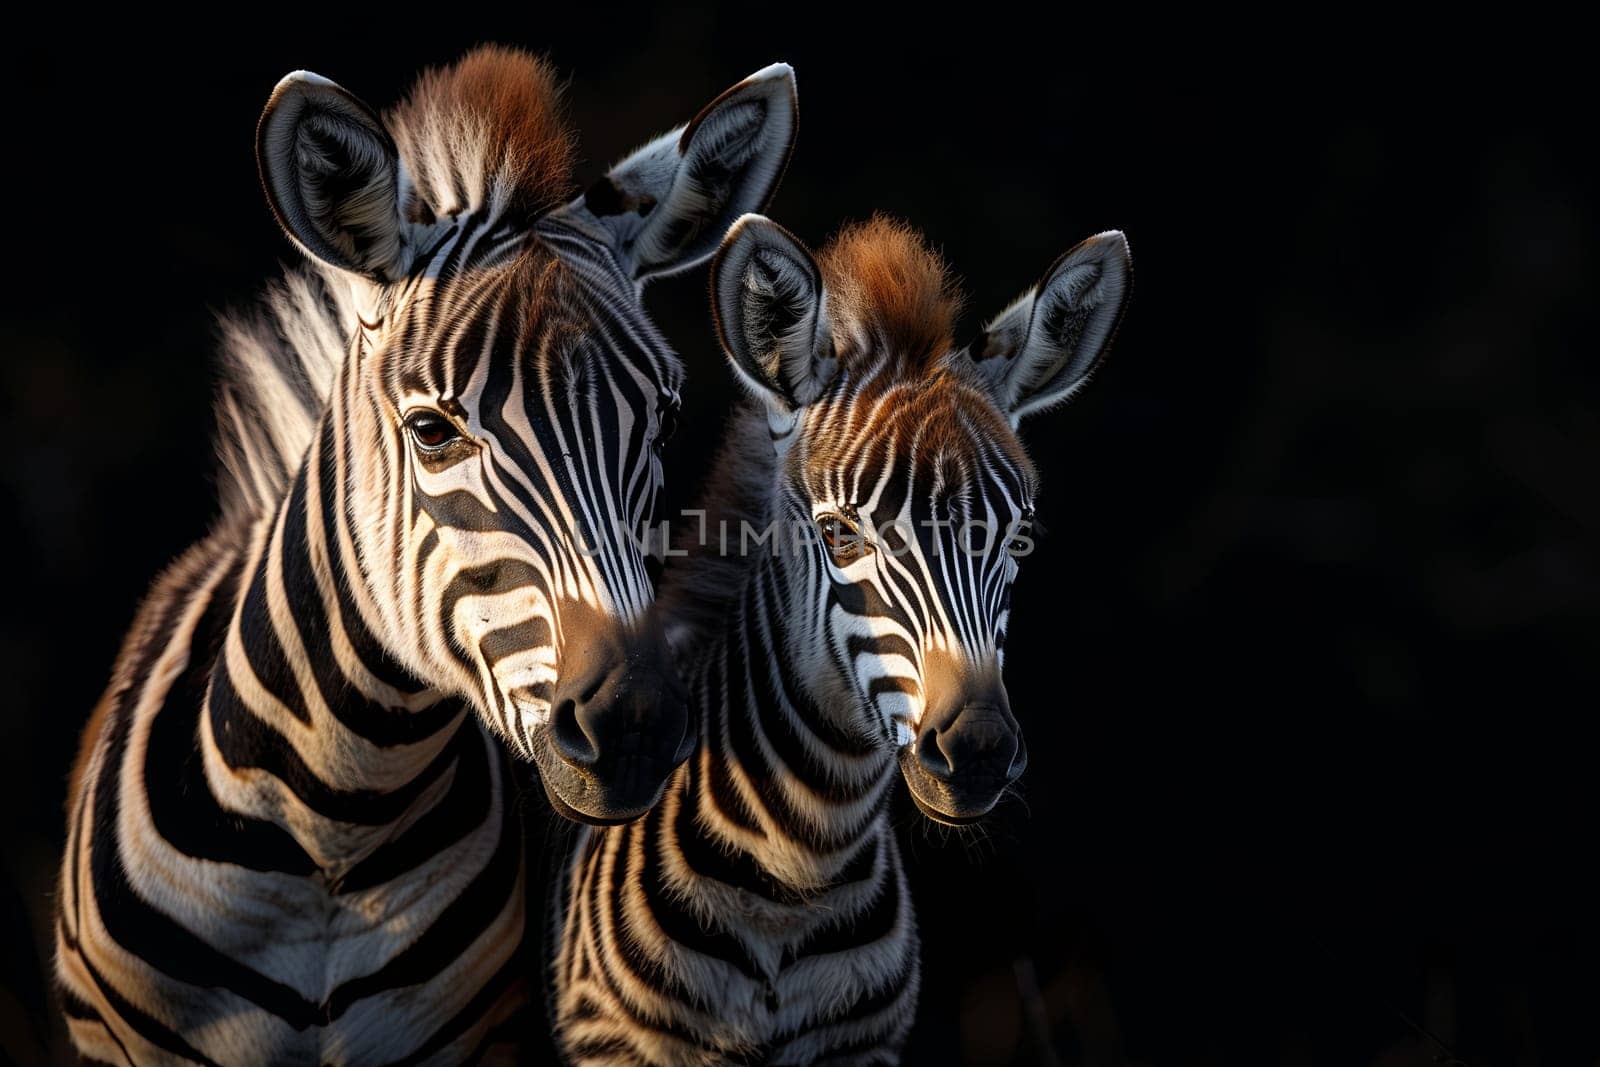 Two zebras standing together on a black background by richwolf